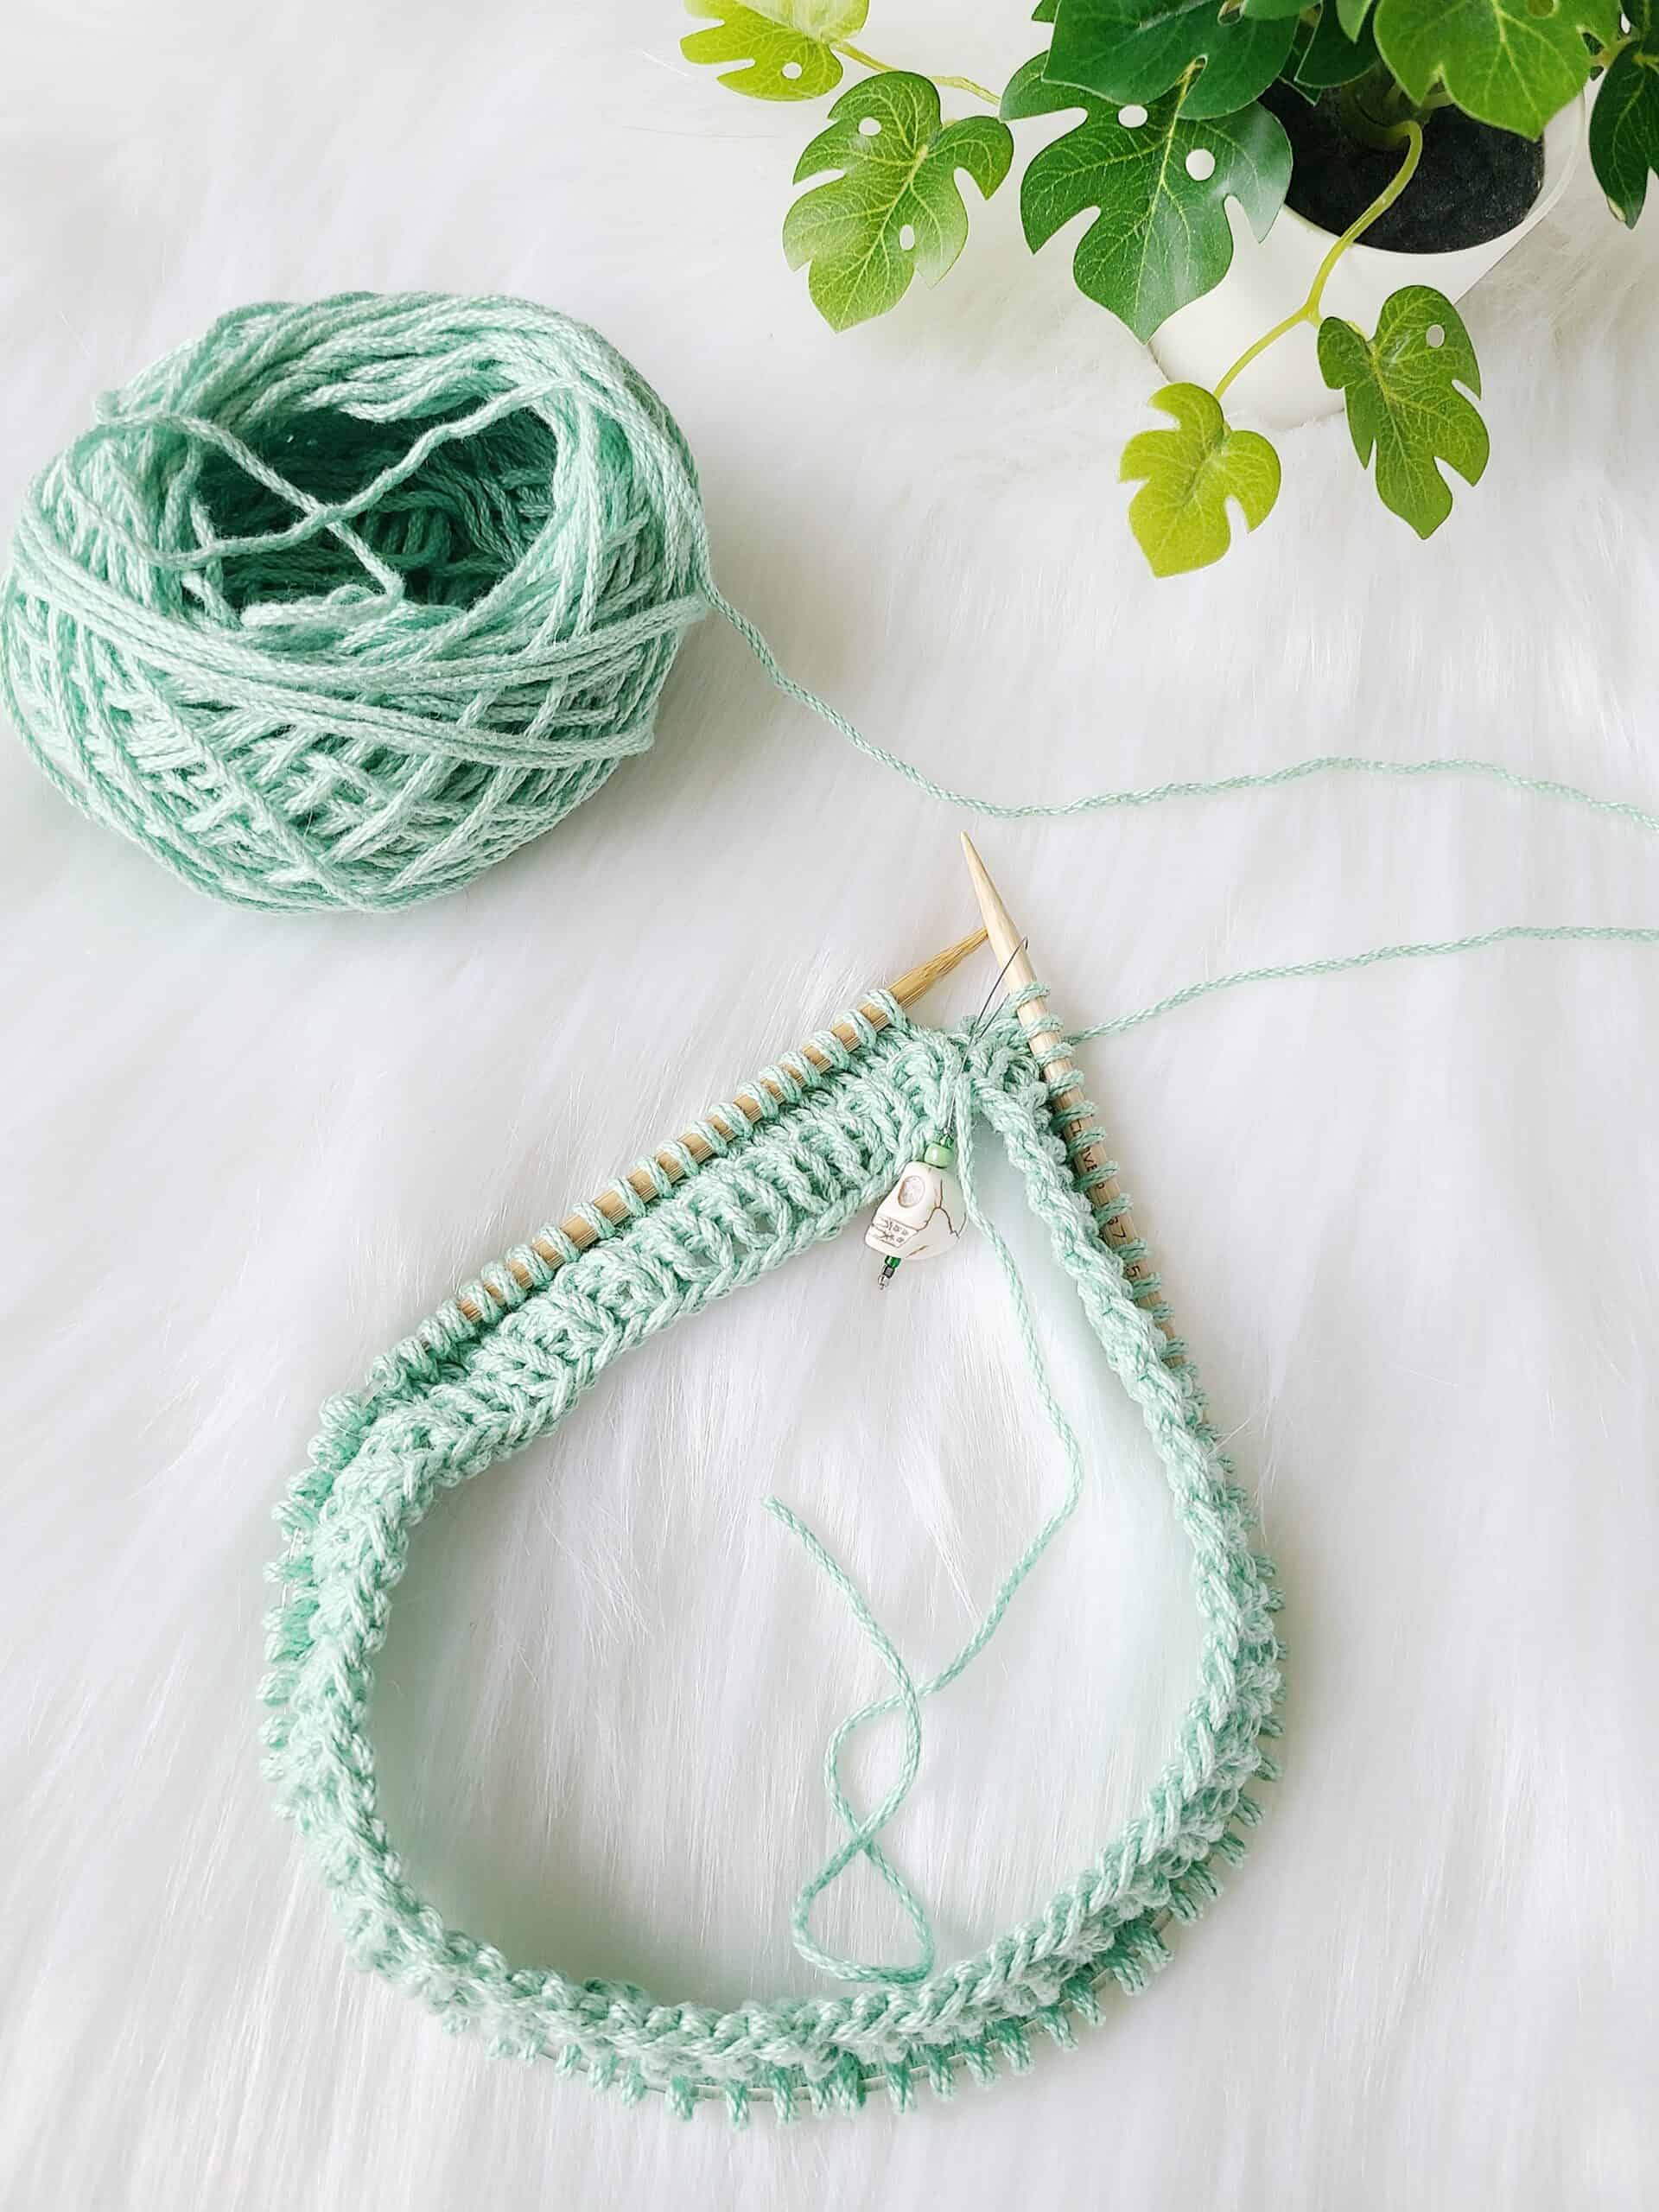 Knitting in the round – an introduction to circular knitting